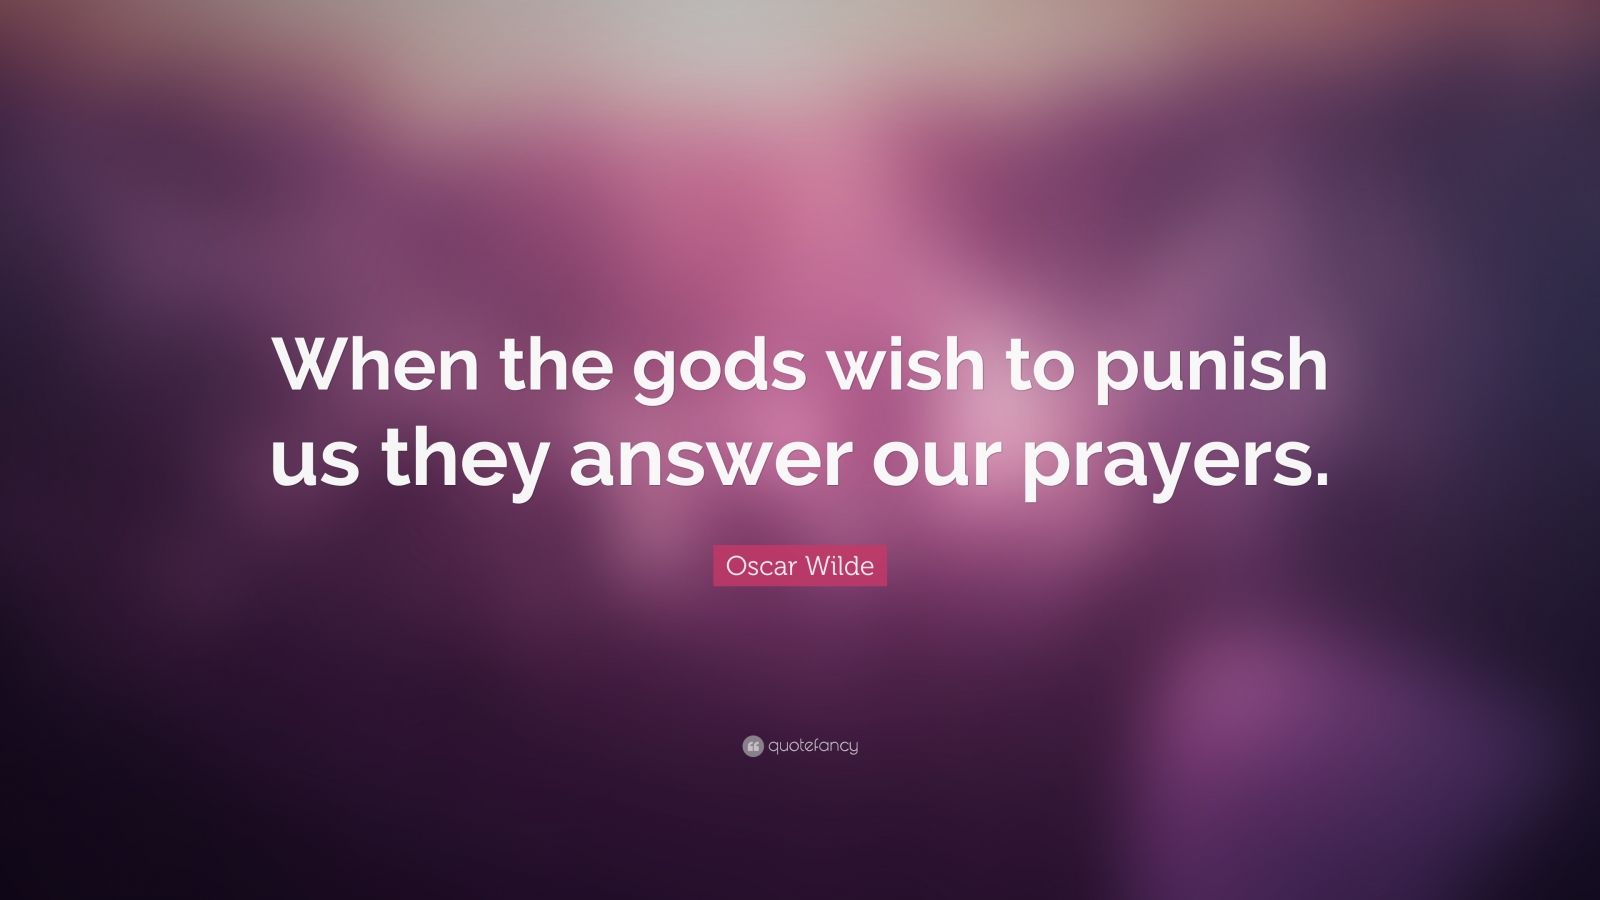 Oscar Wilde Quote: “When the gods wish to punish us they answer our prayers.”